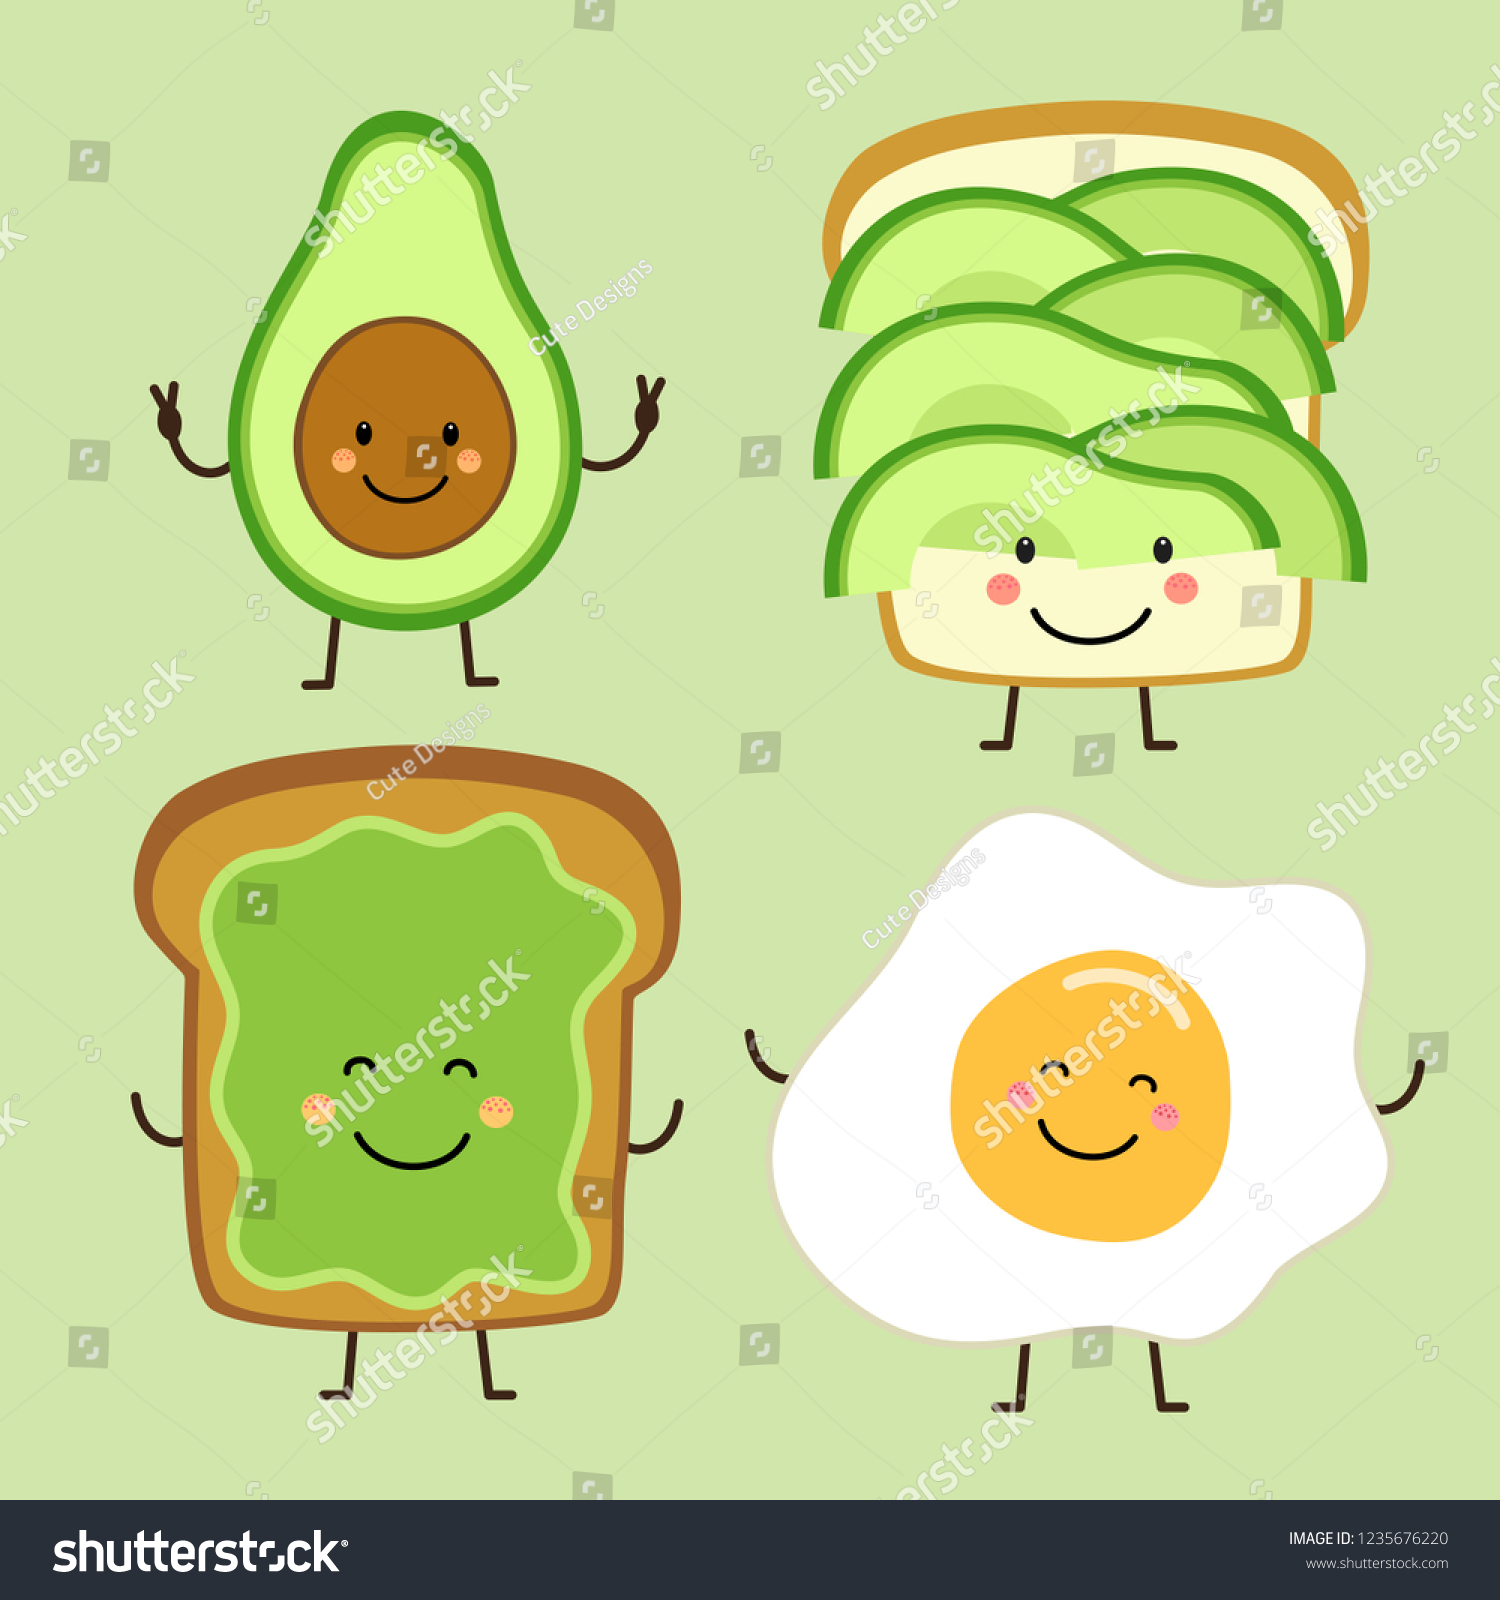 SVG of Cute hand drawn cartoon characters of avocado, toast and egg svg